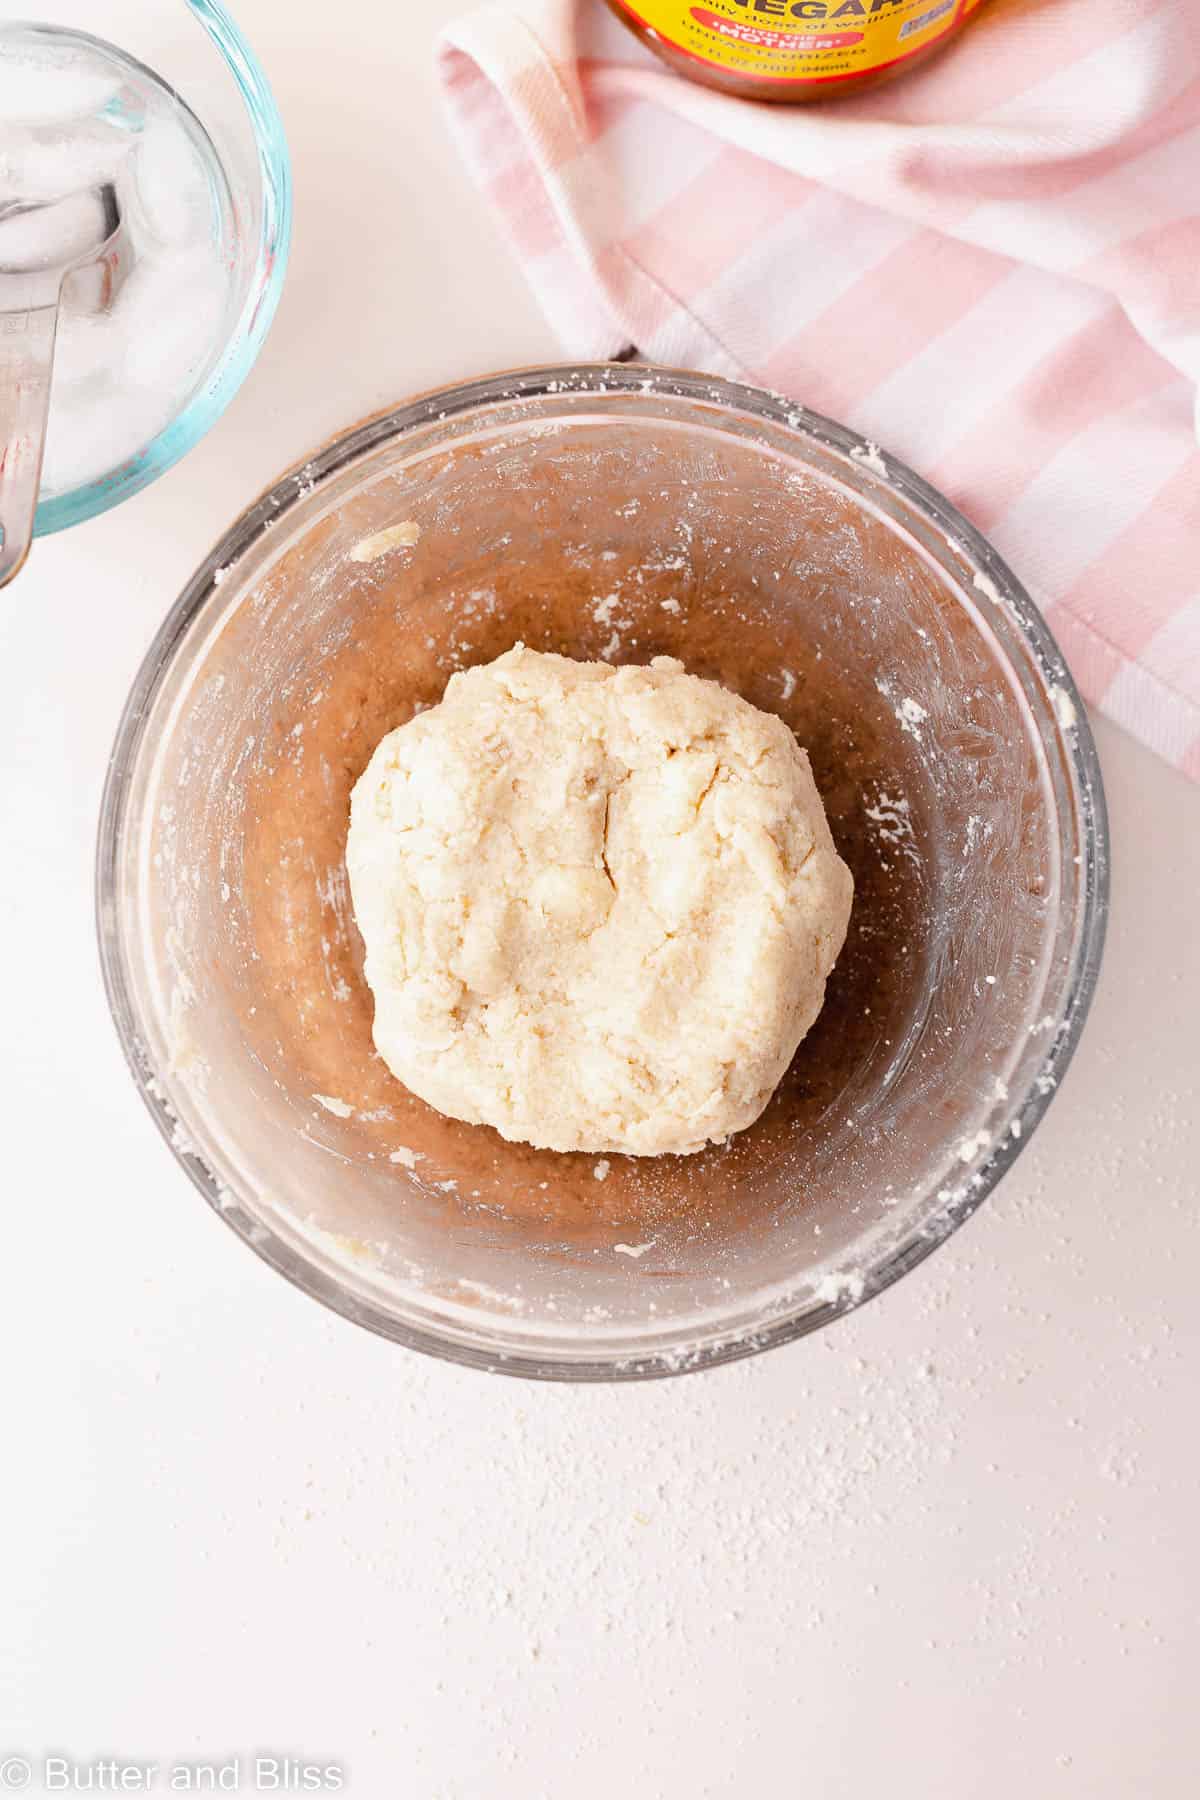 Pie dough dough formed into a ball in a glass bowl.